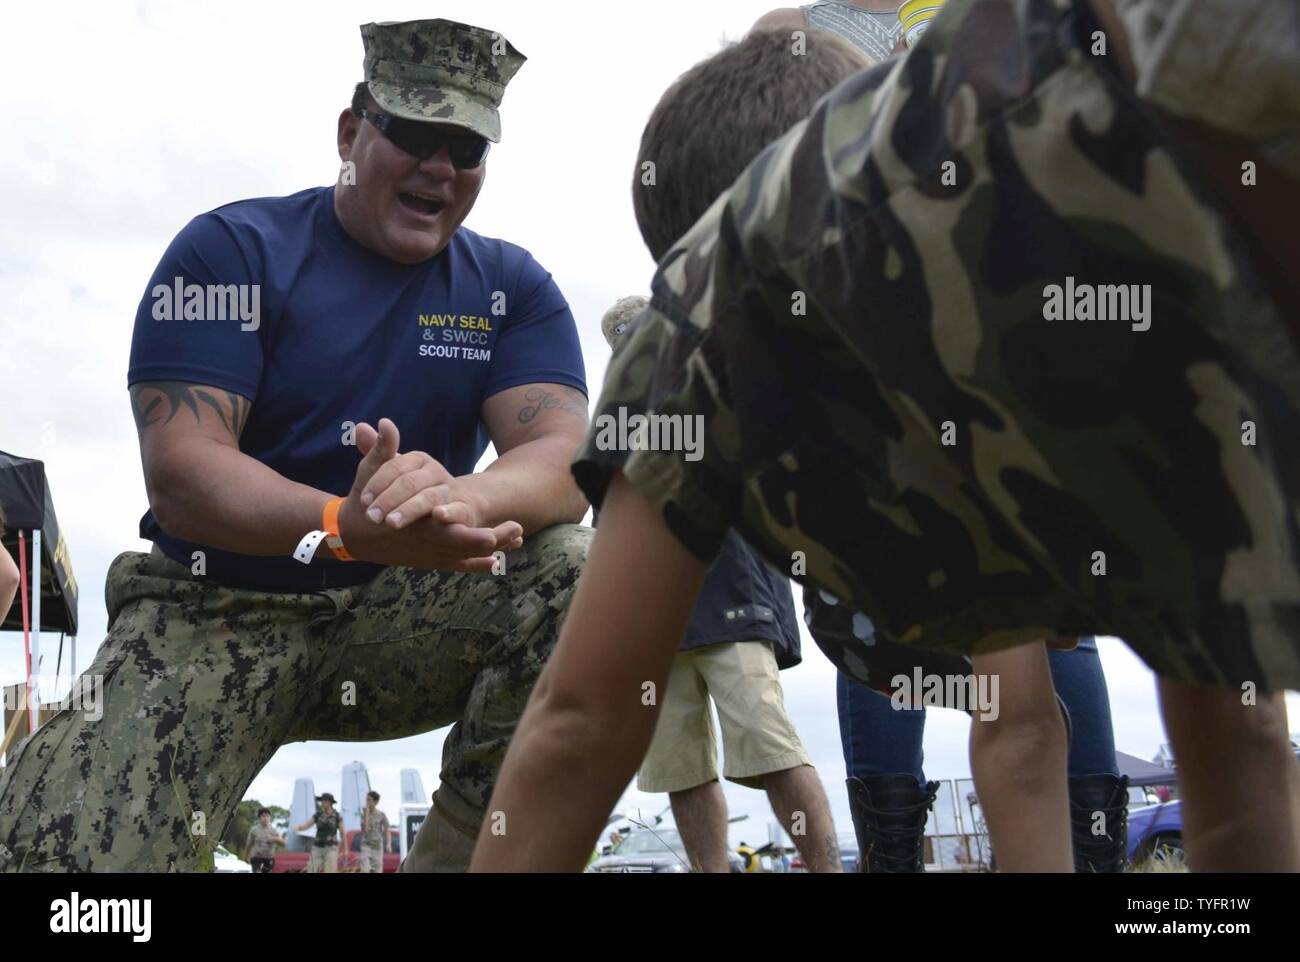 STUART, Fla. (Nov. 6, 2016) - Chief Petty Officer Joseph Schmidt, assigned to the Navy SEAL and SWCC Scout Team, encourages a young fan to do pushups at the 2016 Stuart AirShow. The Scout Team conducts outreach to community groups and athletic teams to inform them about the Naval Special Warfare training mission. Stock Photo